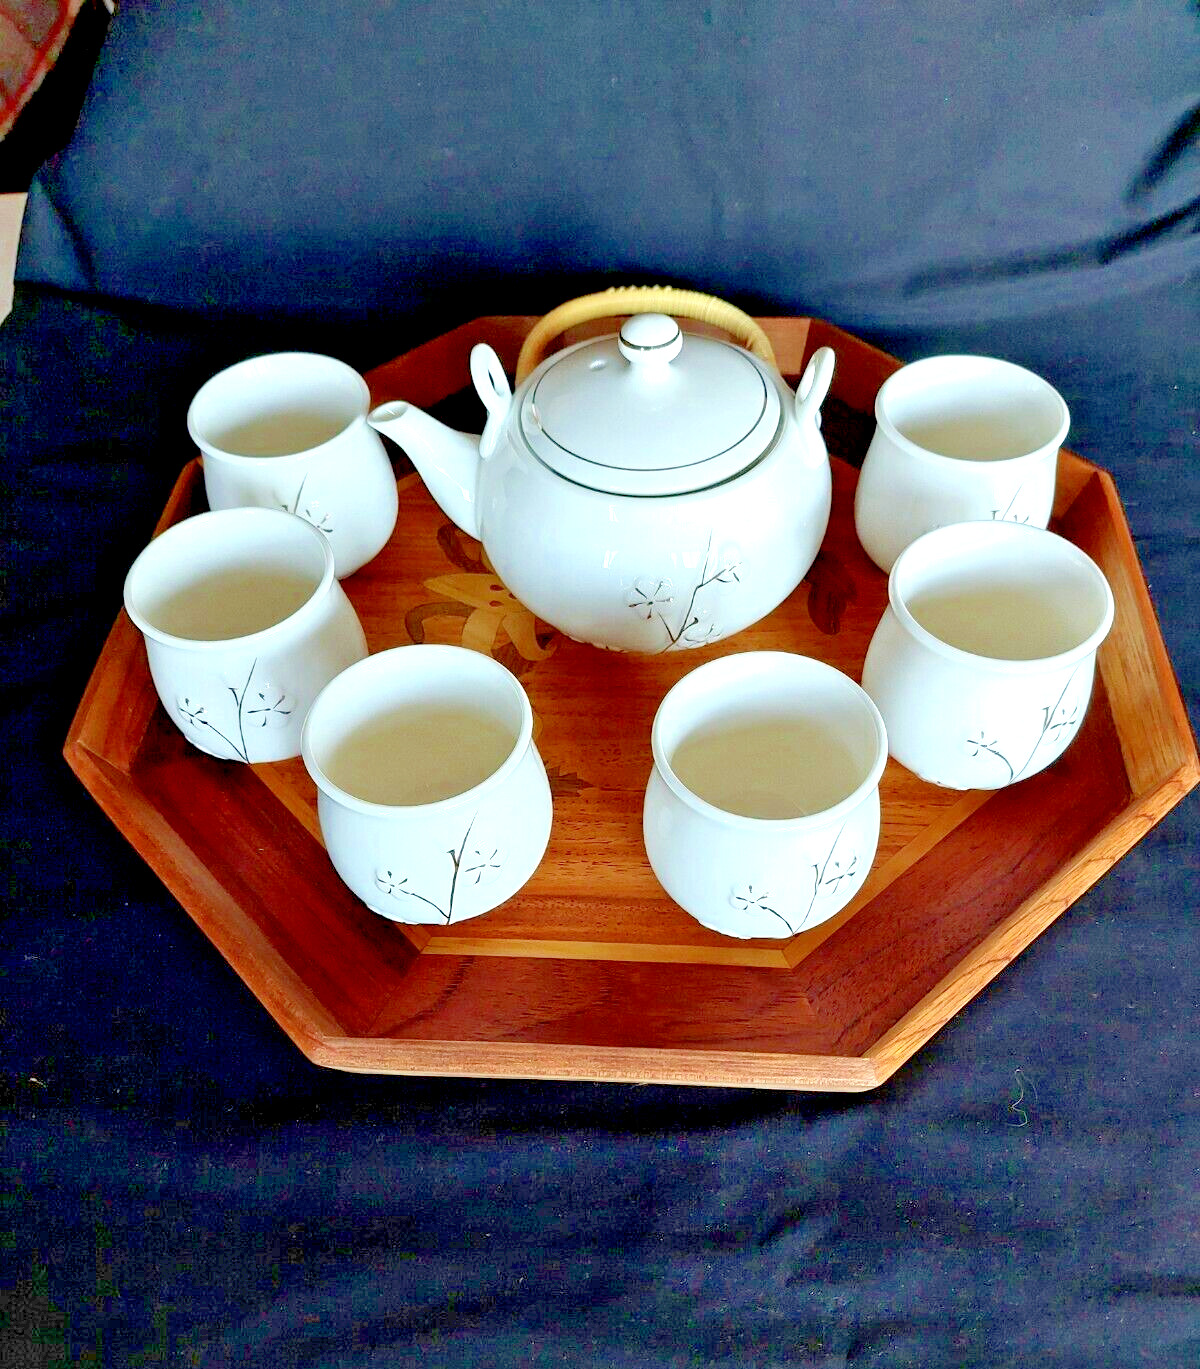 Japanese White Porcelain Tea Set by Dujust 1-Teapot 6-Cups W/Custom Wooden Tray